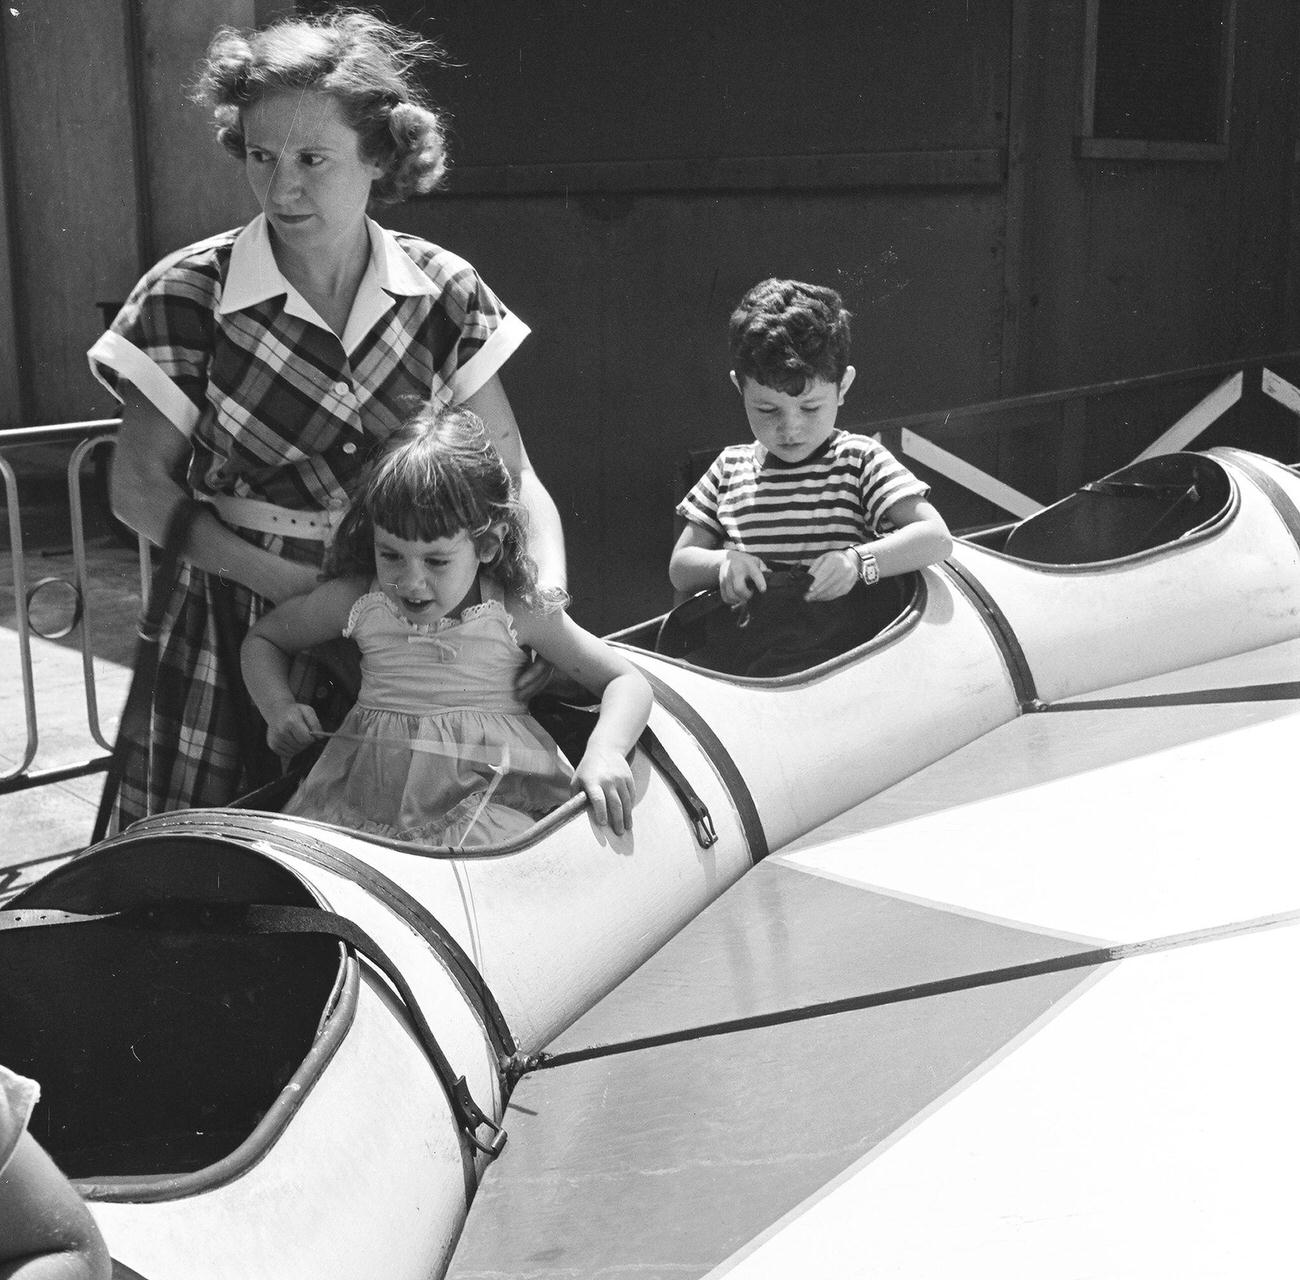 Mother Helps Daughter Board A Ride While Son Adjusts Seatbelt At Coney Island, 1948